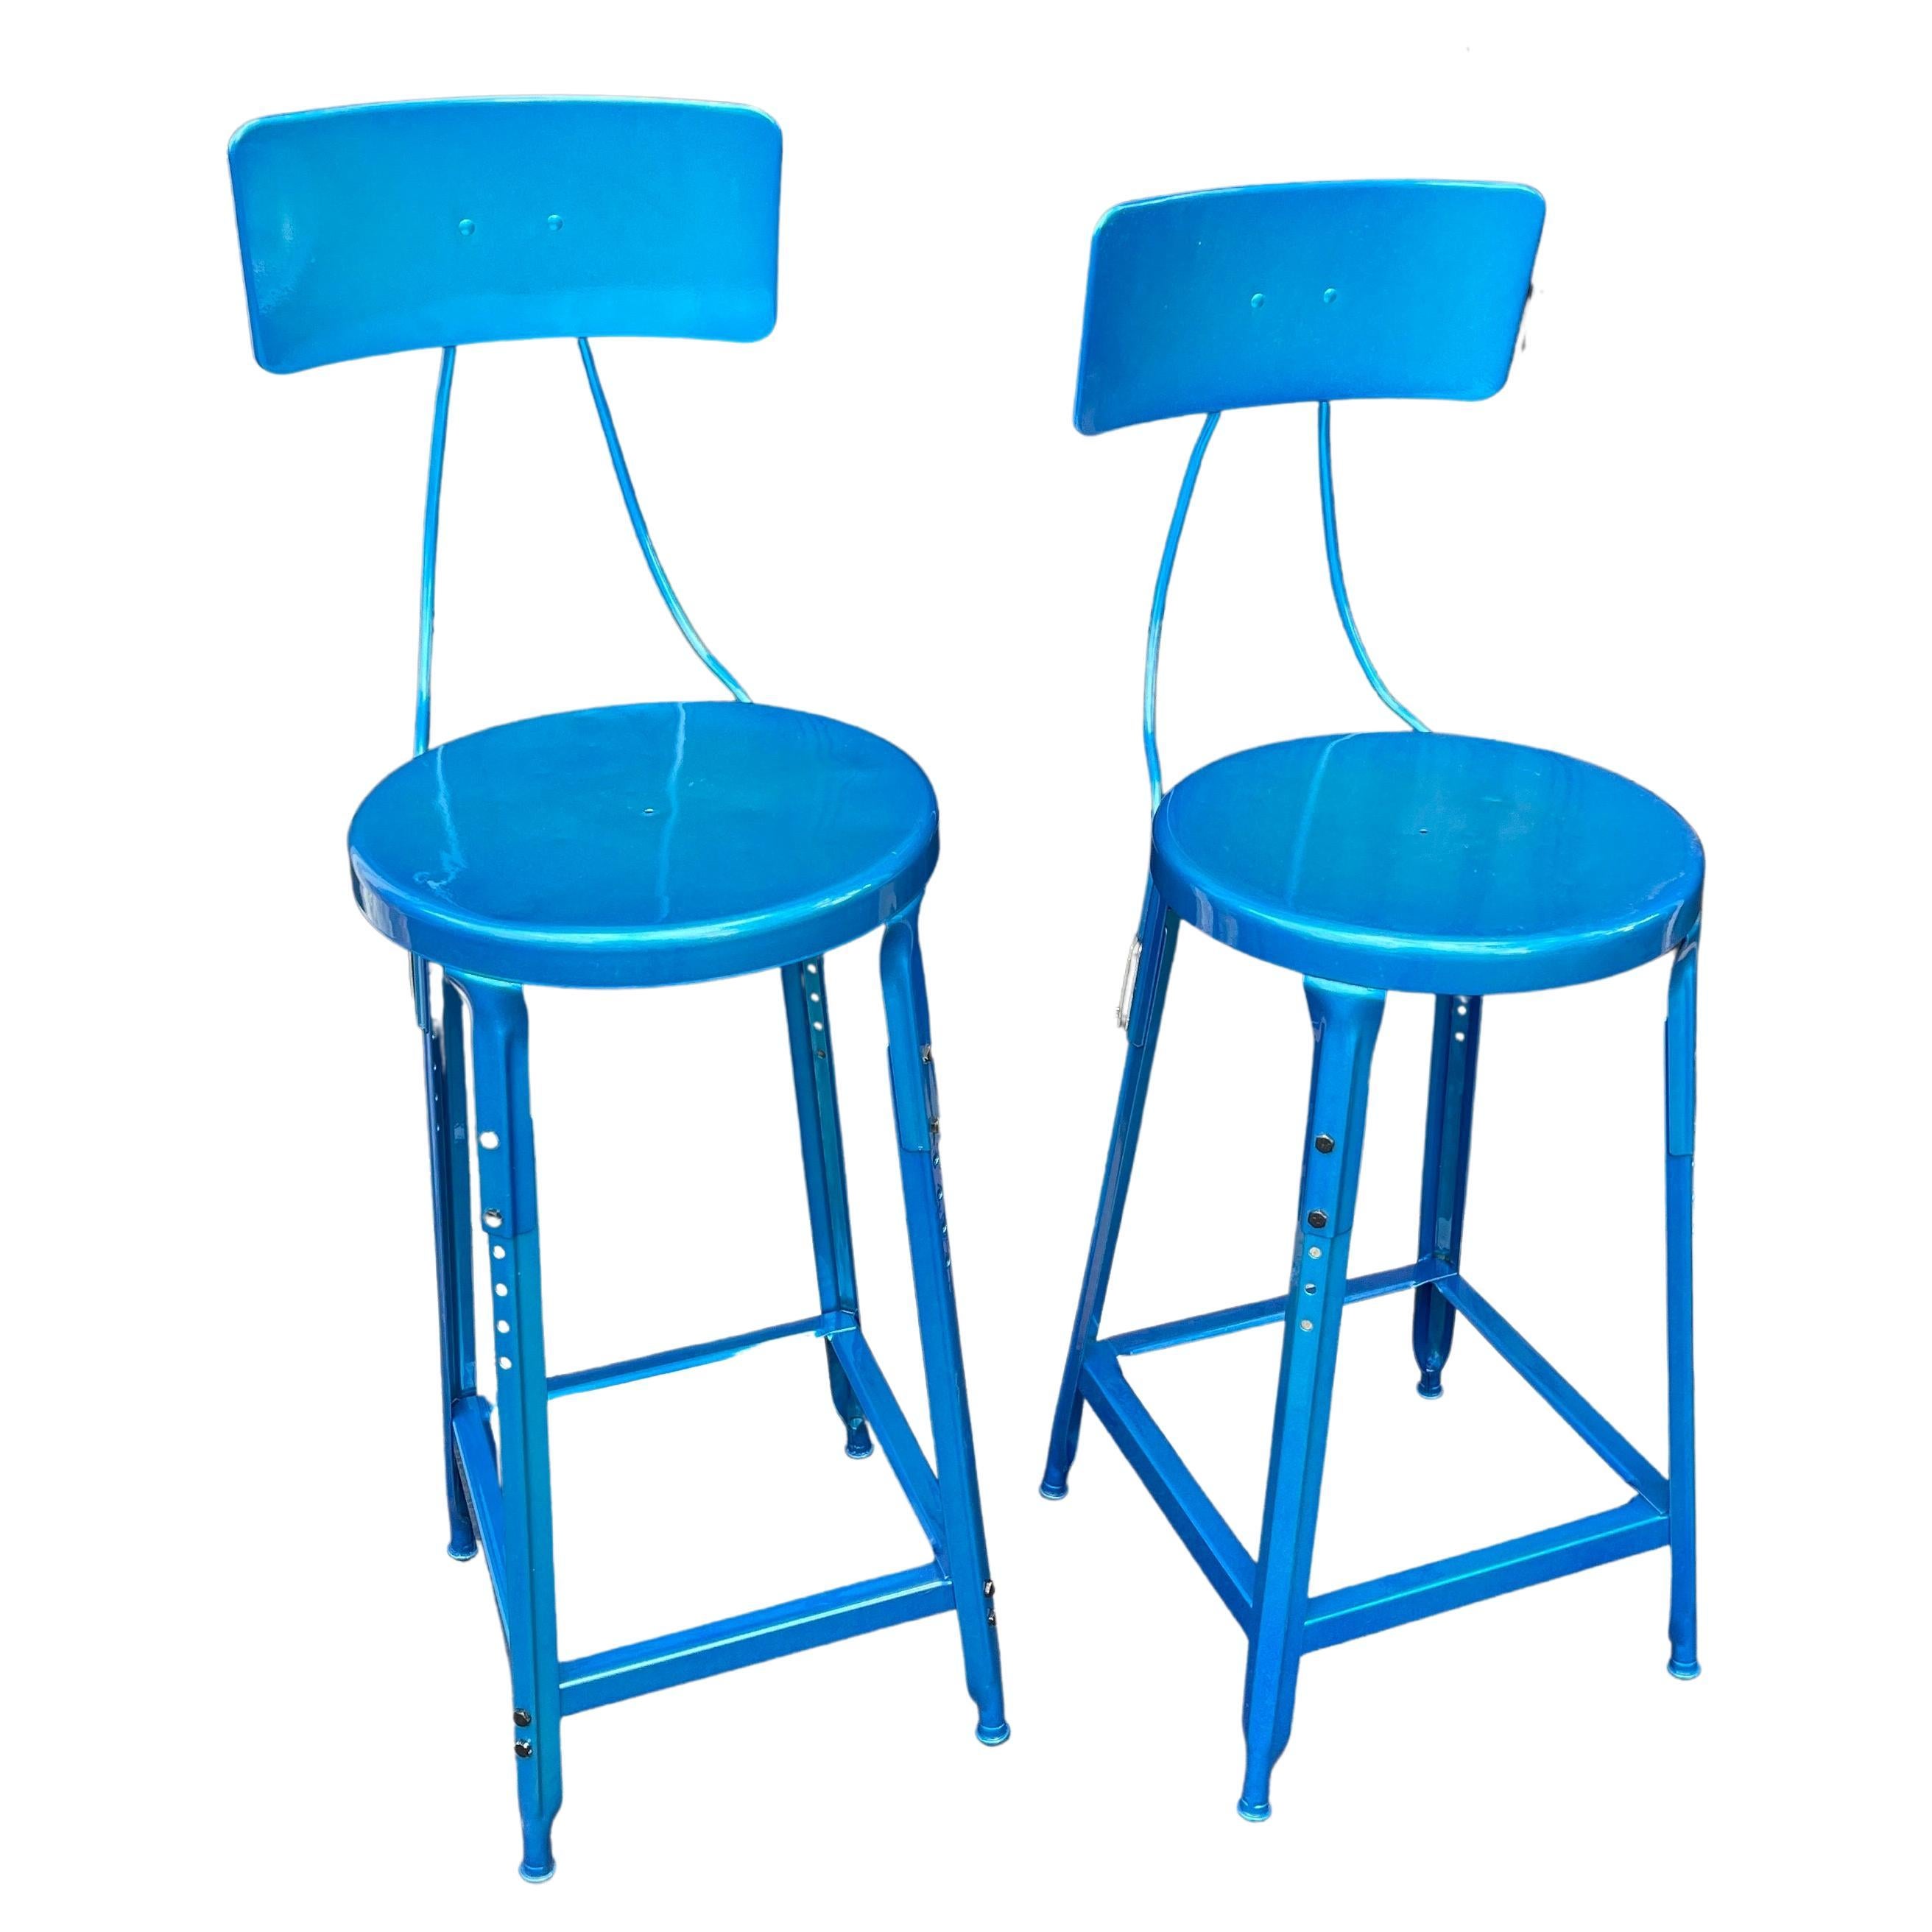 Set of Two Heavy Industrial Bar Stools in Powder Coated Blue For Sale